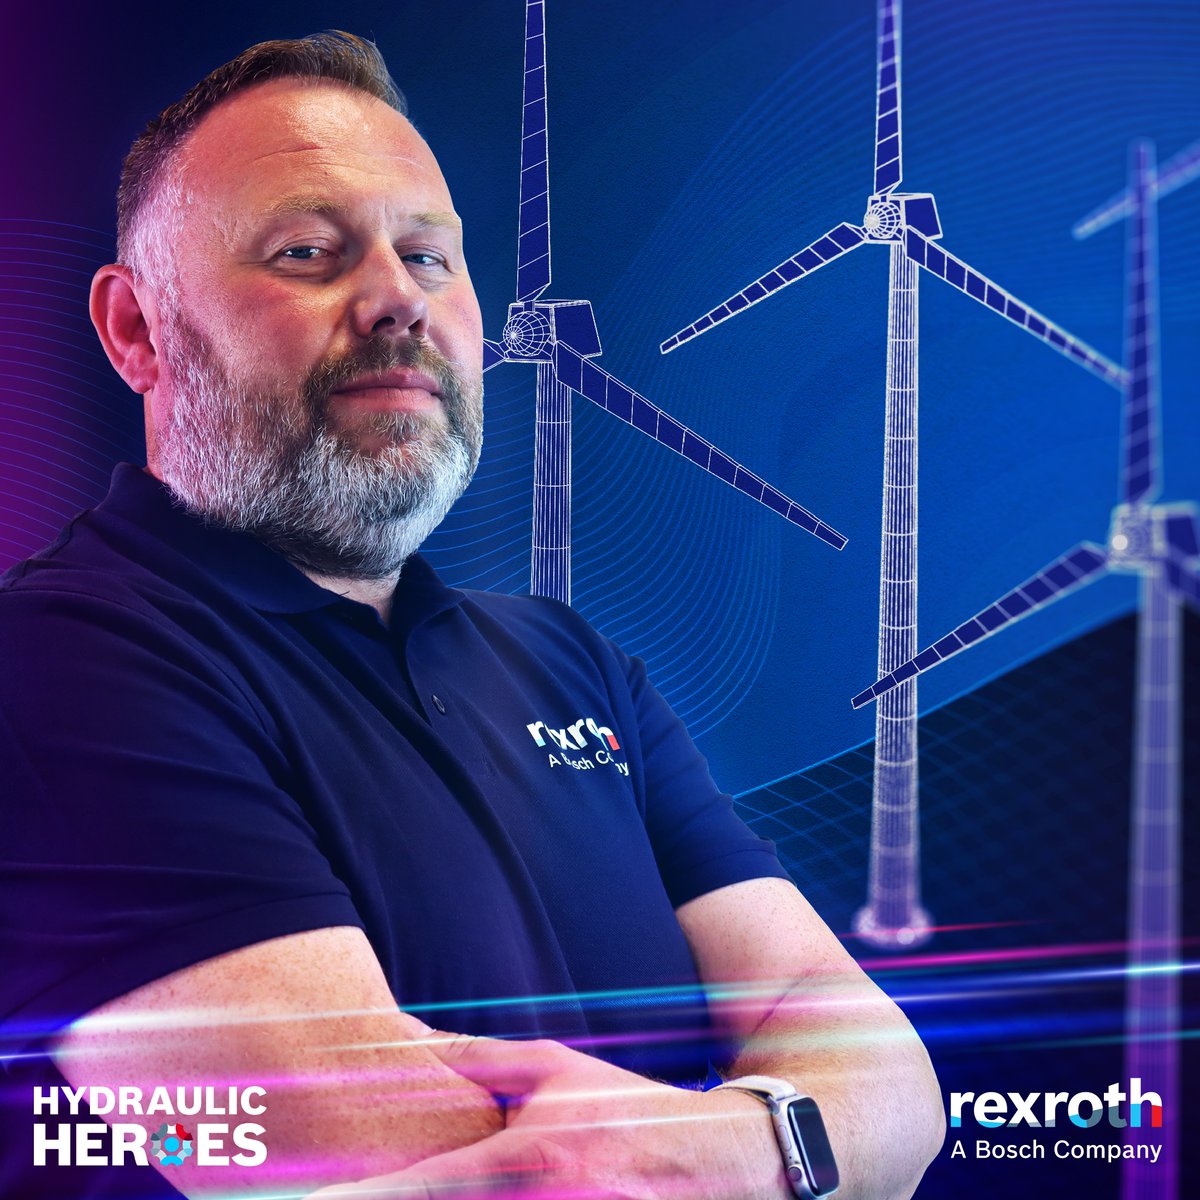 Ben's pride reflects the innovation and dedication behind Rexroth's diverse range of products, contributing to cutting-edge technologies and sustainable solutions!

Read Ben’s full interview here: bit.ly/3HMt09Z

#RexrothInnovation #HydraulicHero #SustainableTechnology